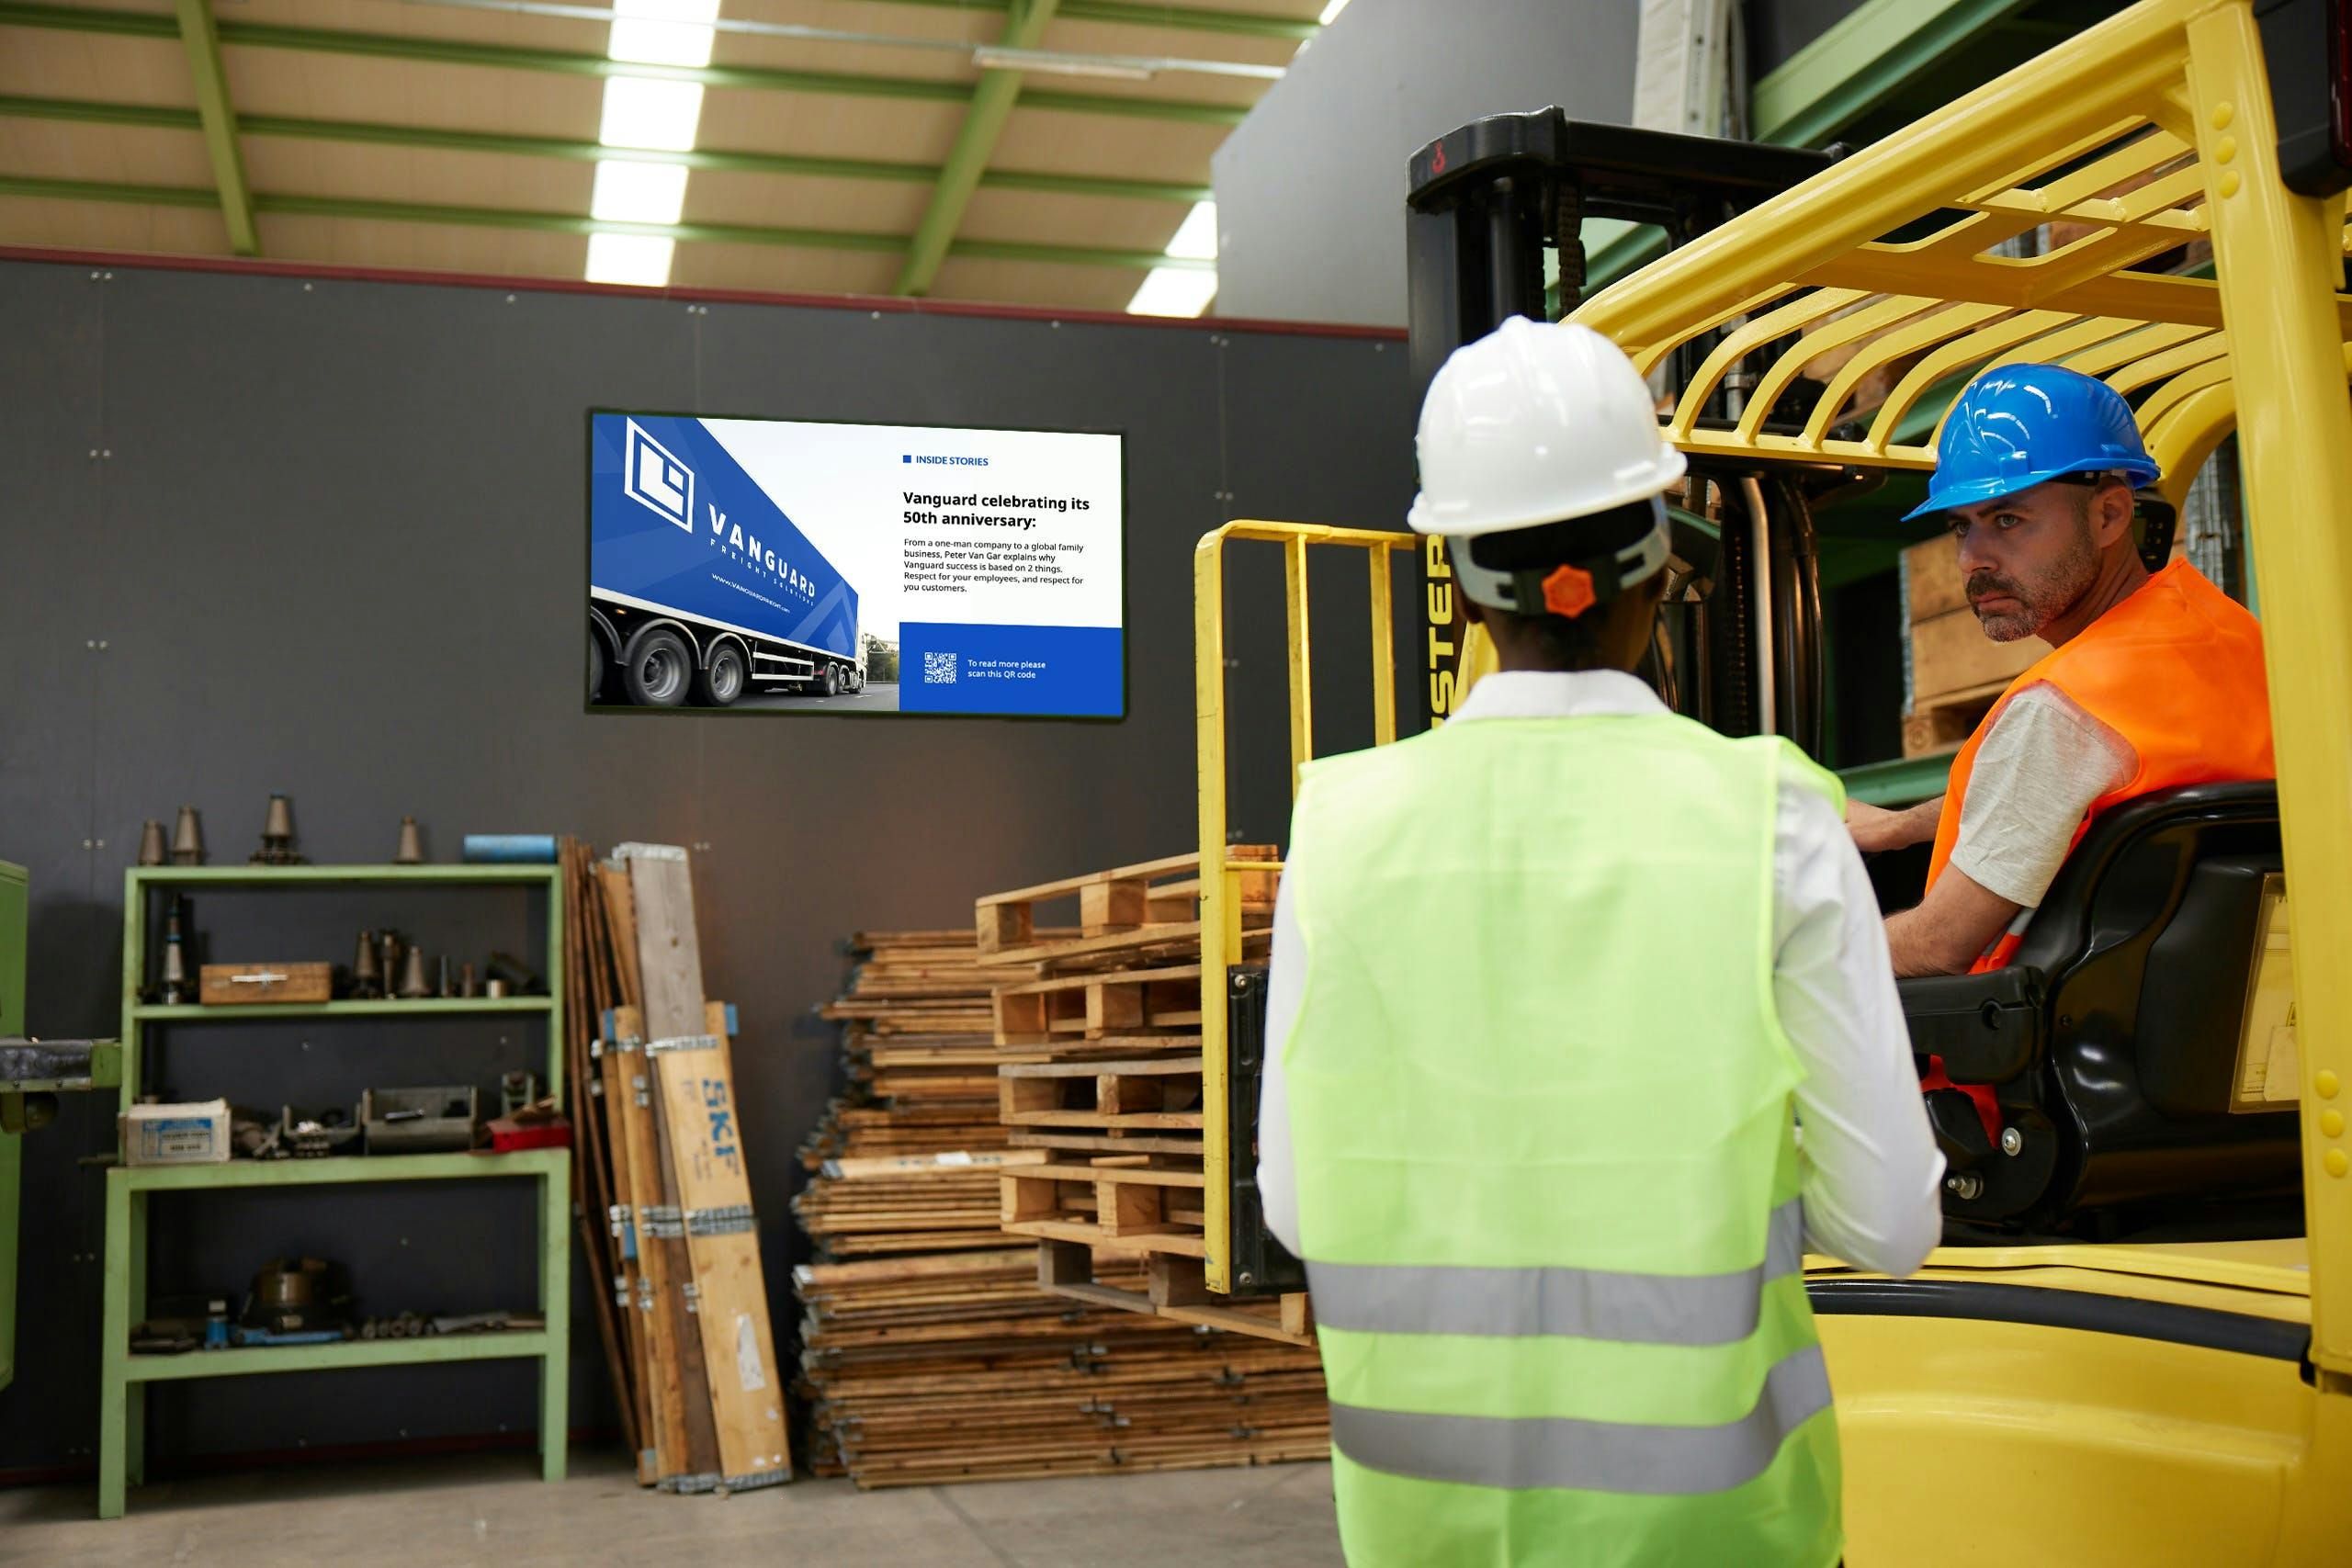 ScreenCloud Article - INFOGRAPHIC: How digital signage connects the manufacturing plant floor